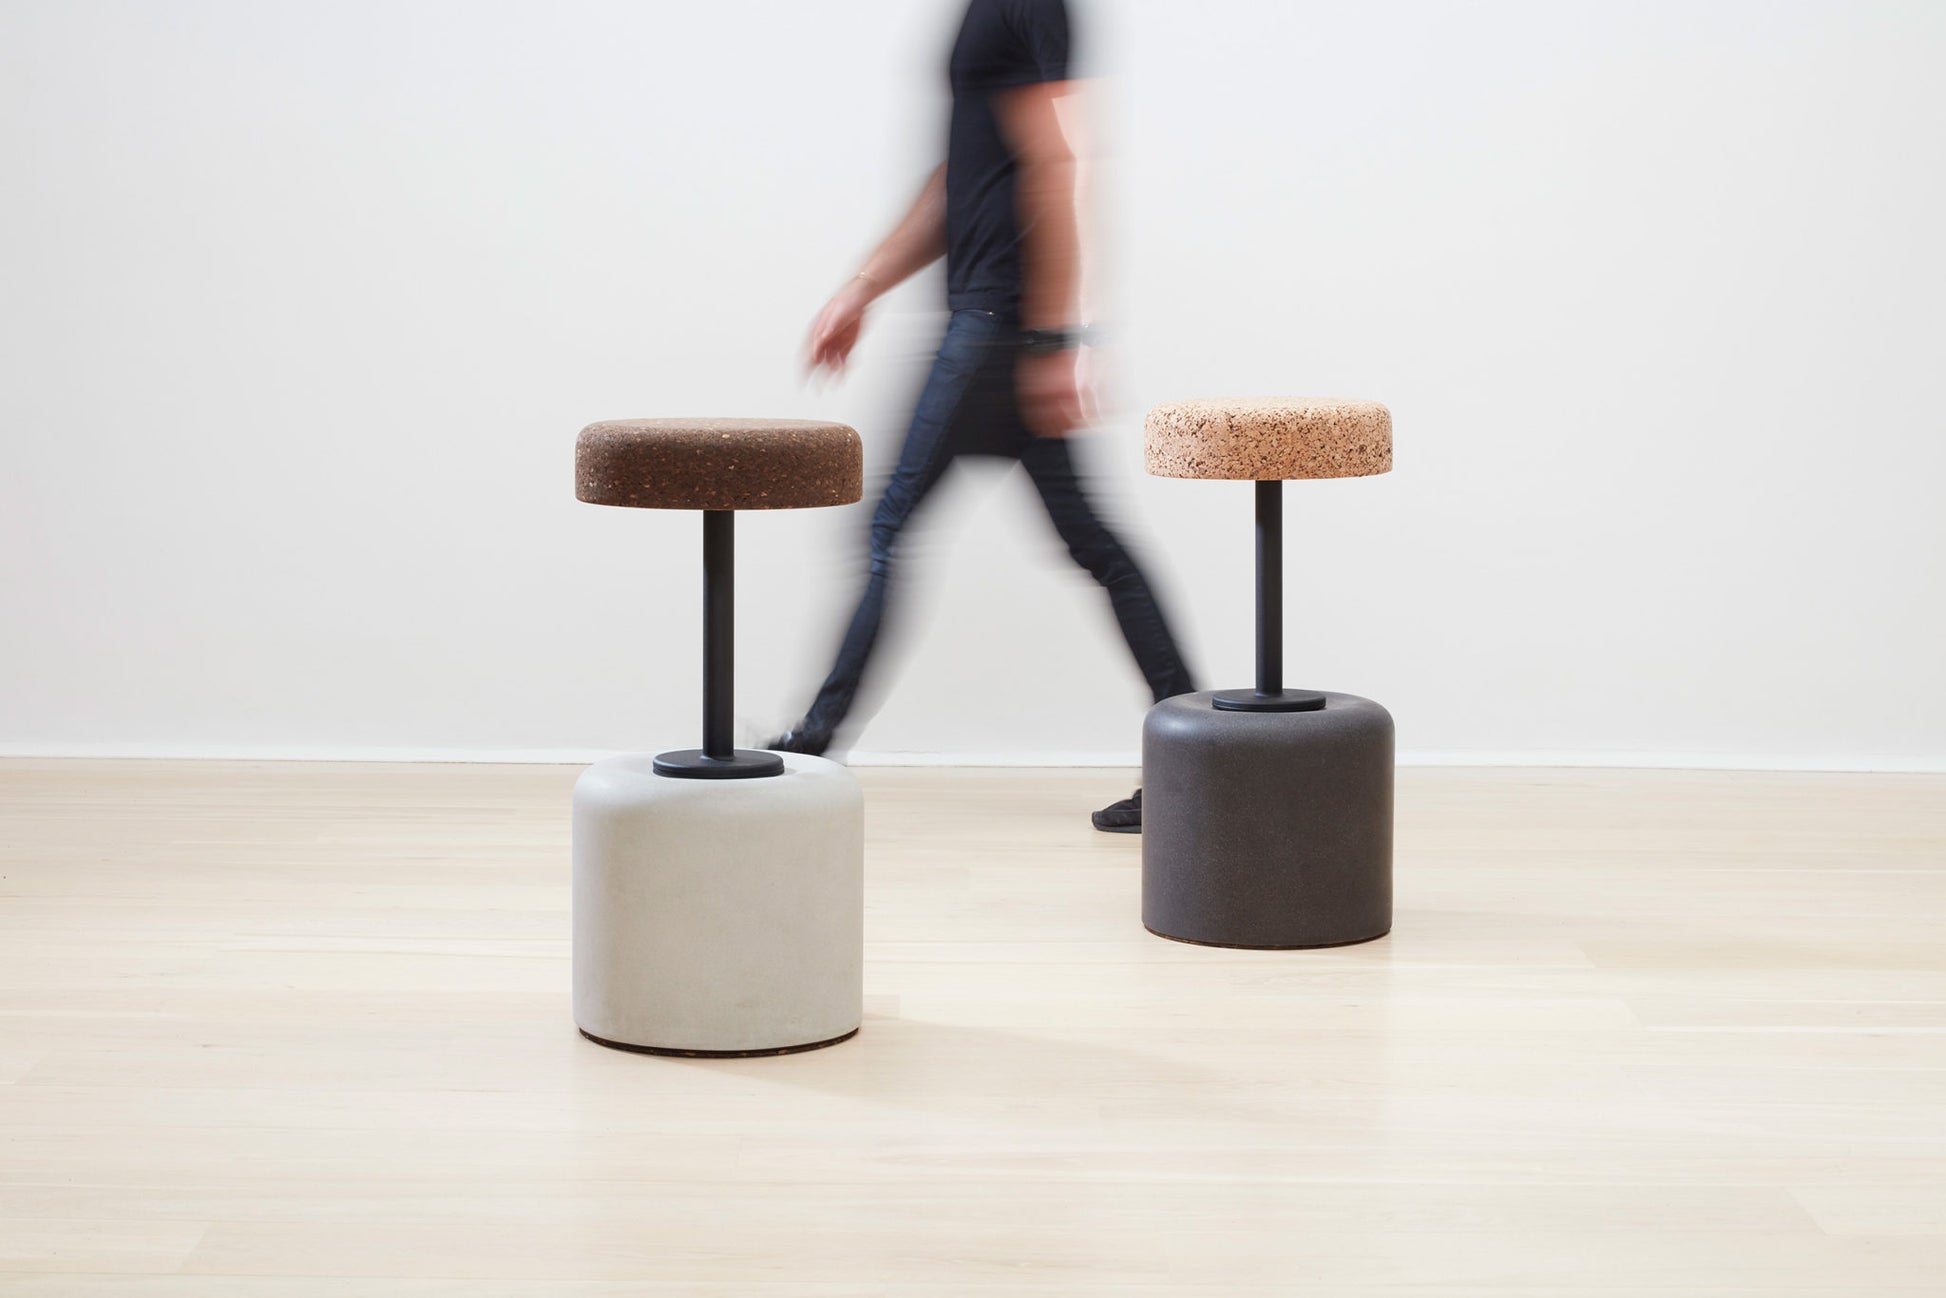 Designer Laurie Wiid van Heerden passes behind the elegantly designed Wiid Swivel Cork and Concrete Barstool in Natural Grey and Dark Cork, providing a sense of scale. This image emphasizes the stool's sleek, modern design and the contrast between the robust grey concrete base and the warm, dark cork seat. Laurie's presence highlights the thoughtful craftsmanship and sustainable innovation behind this contemporary piece of furniture